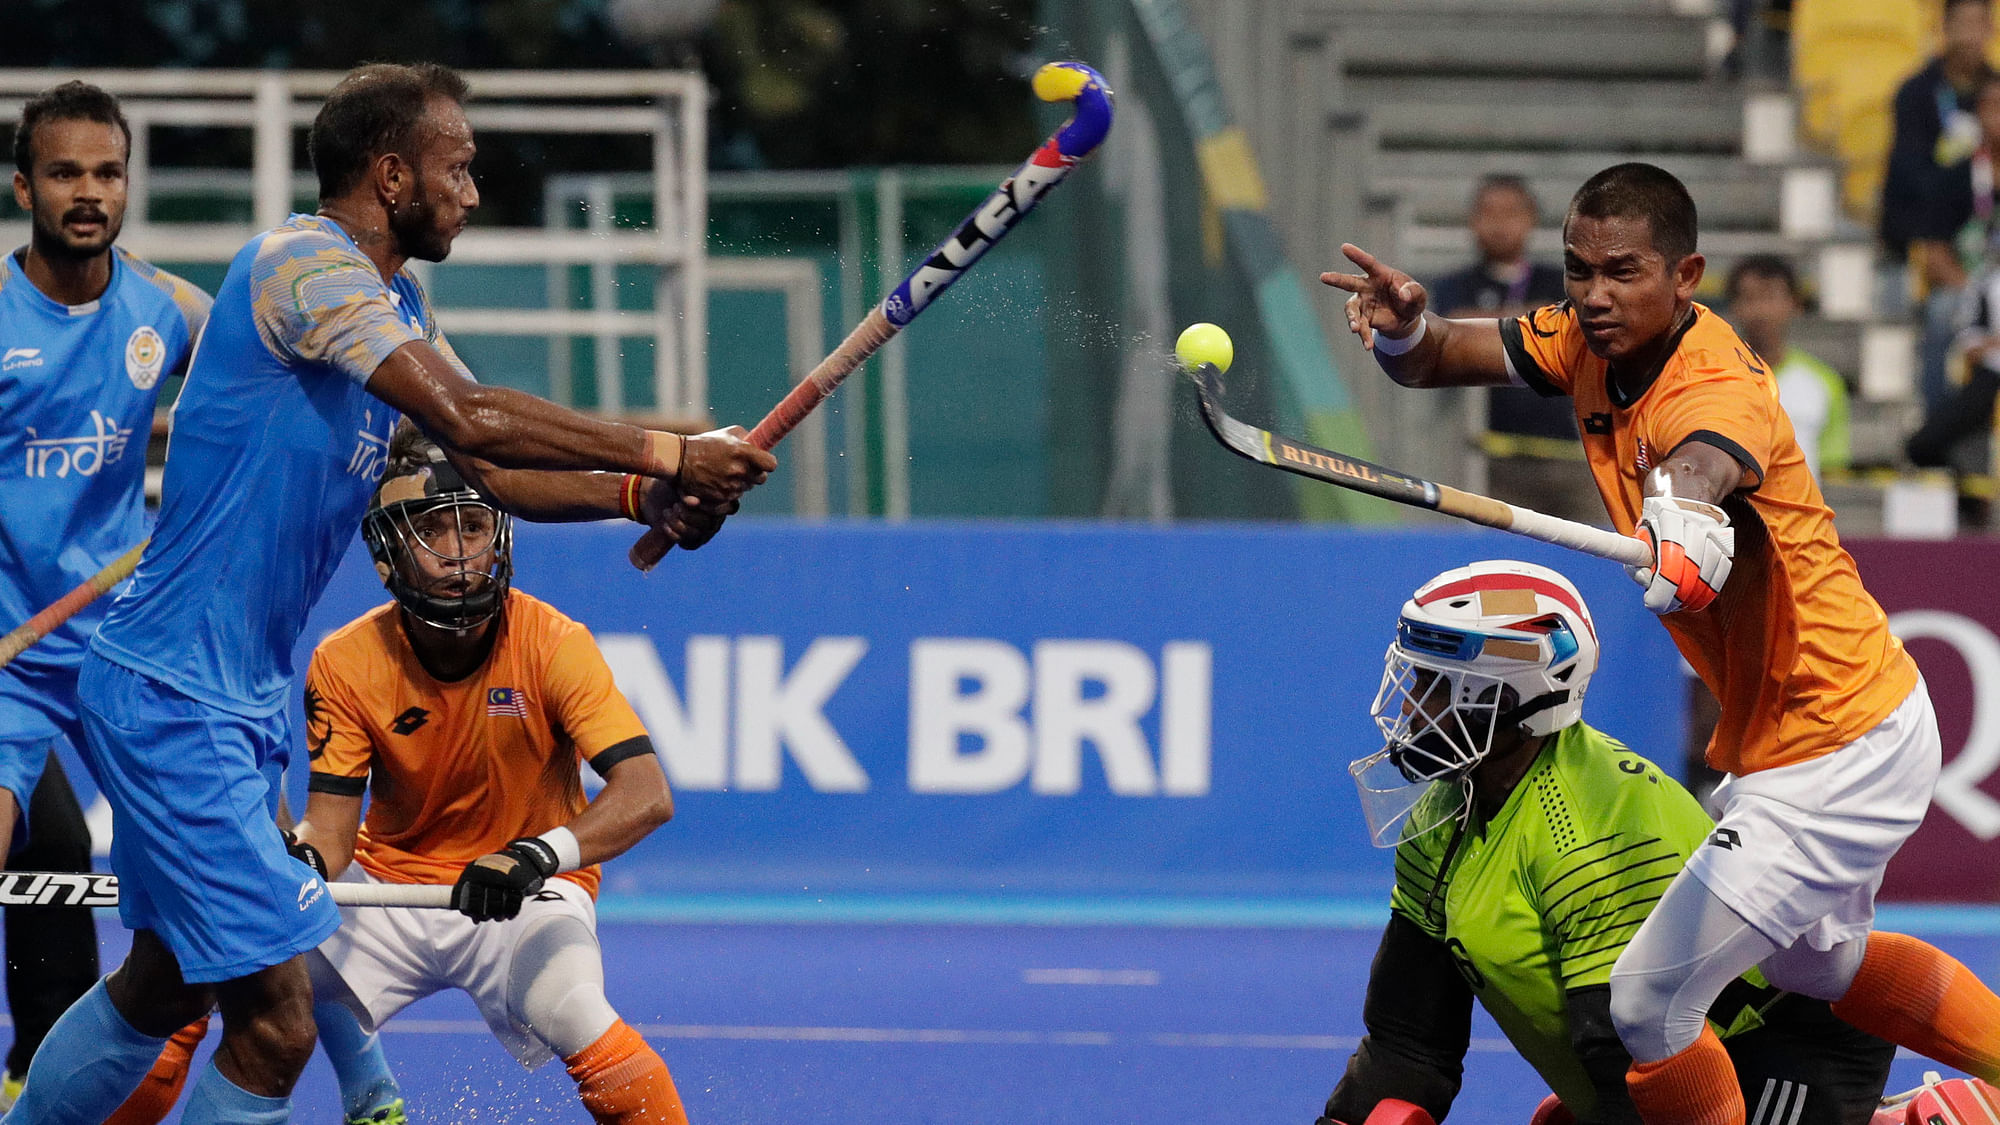 Malaysia’s Muhammad Abd Rahim, right, during their men’s hockey semi-final match against India at the 18th Asian Games in Jakarta, Indonesia.